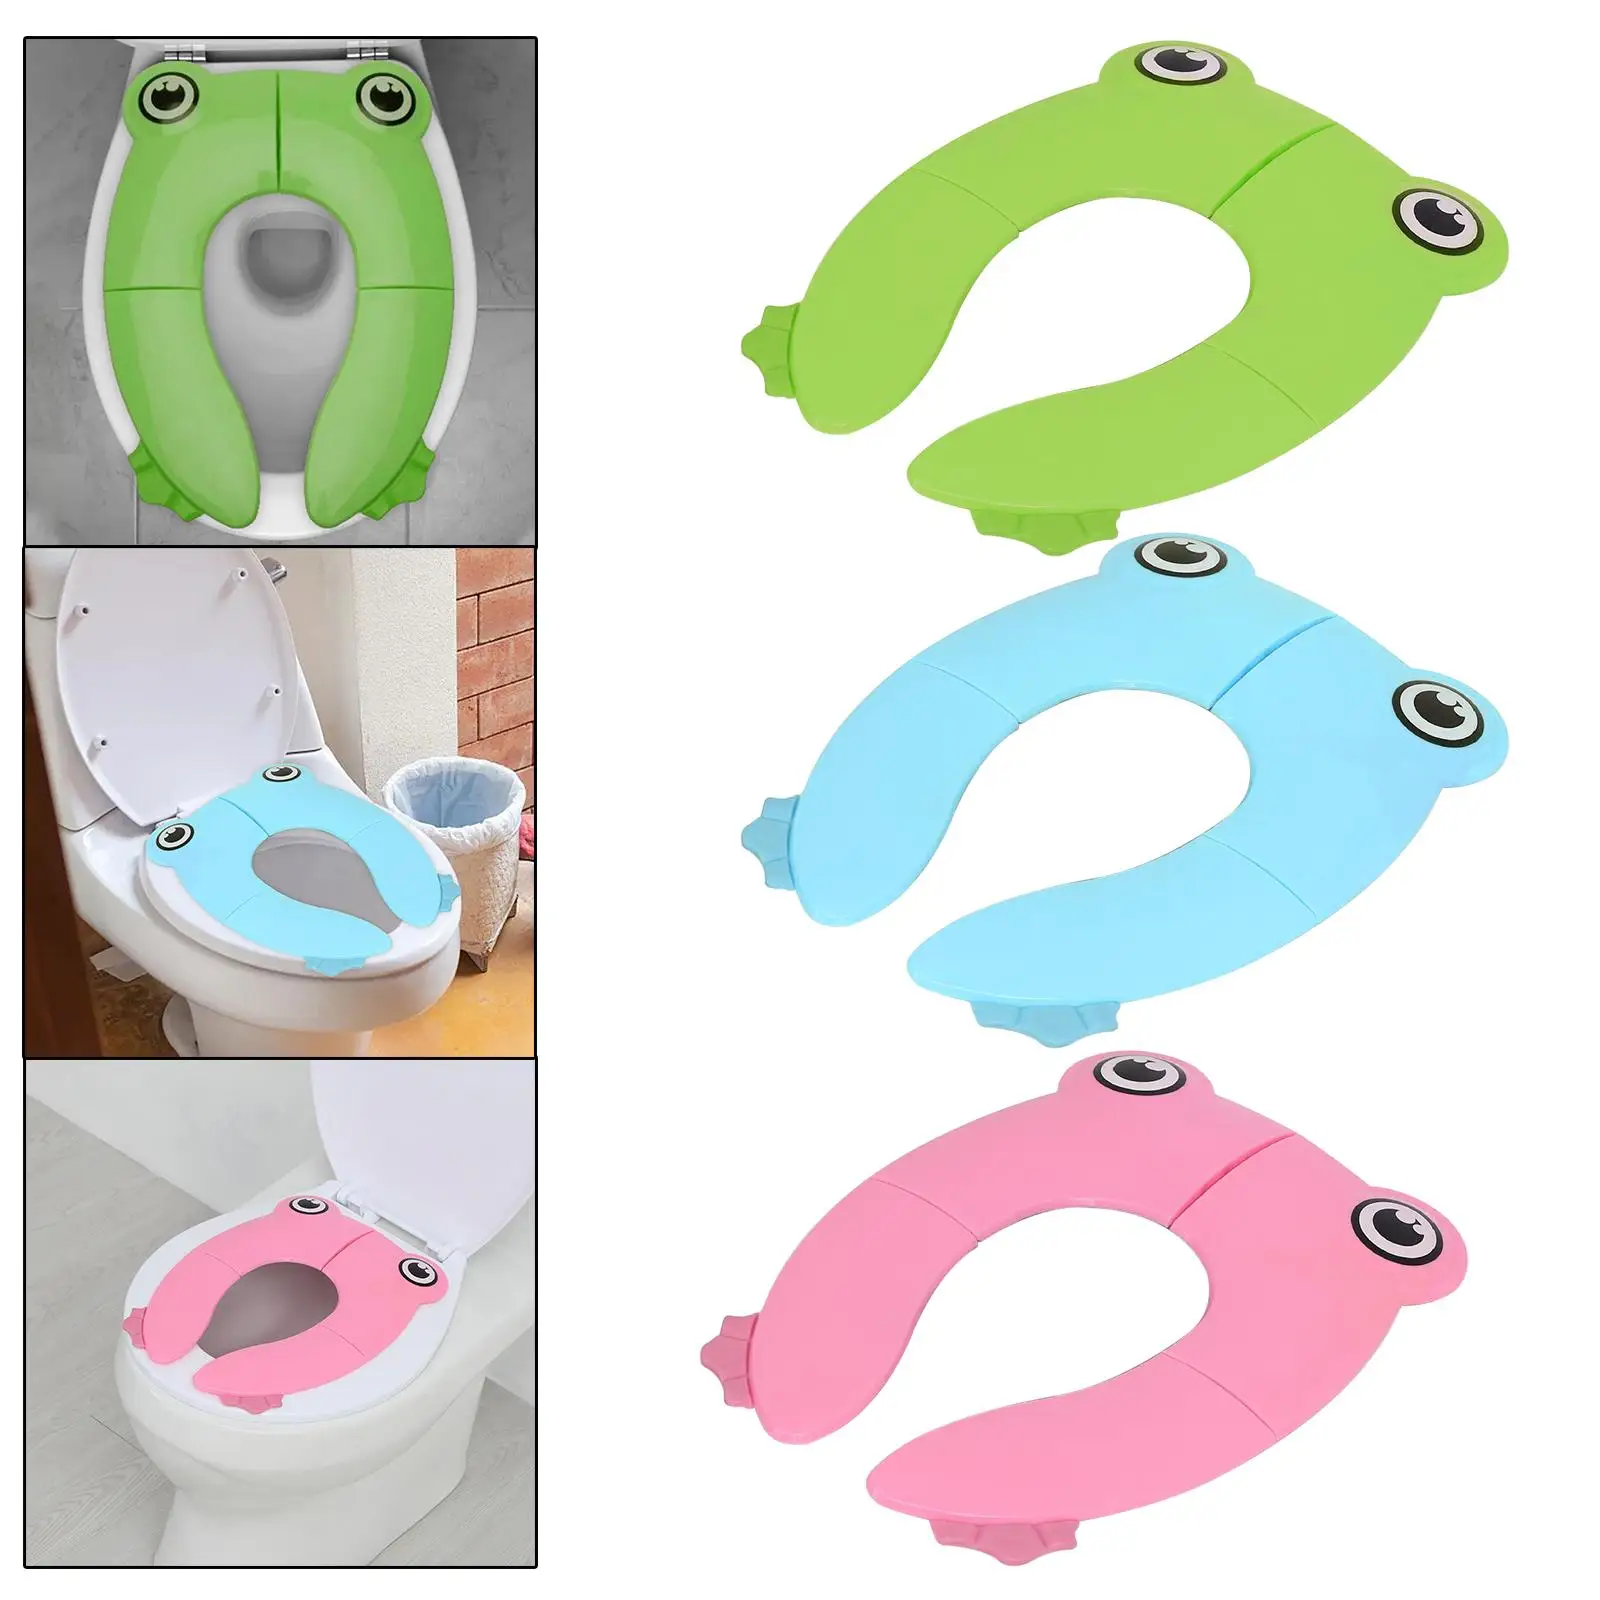 Folding Potty Seat Covers Comfortable for Traveling Camping Toddler